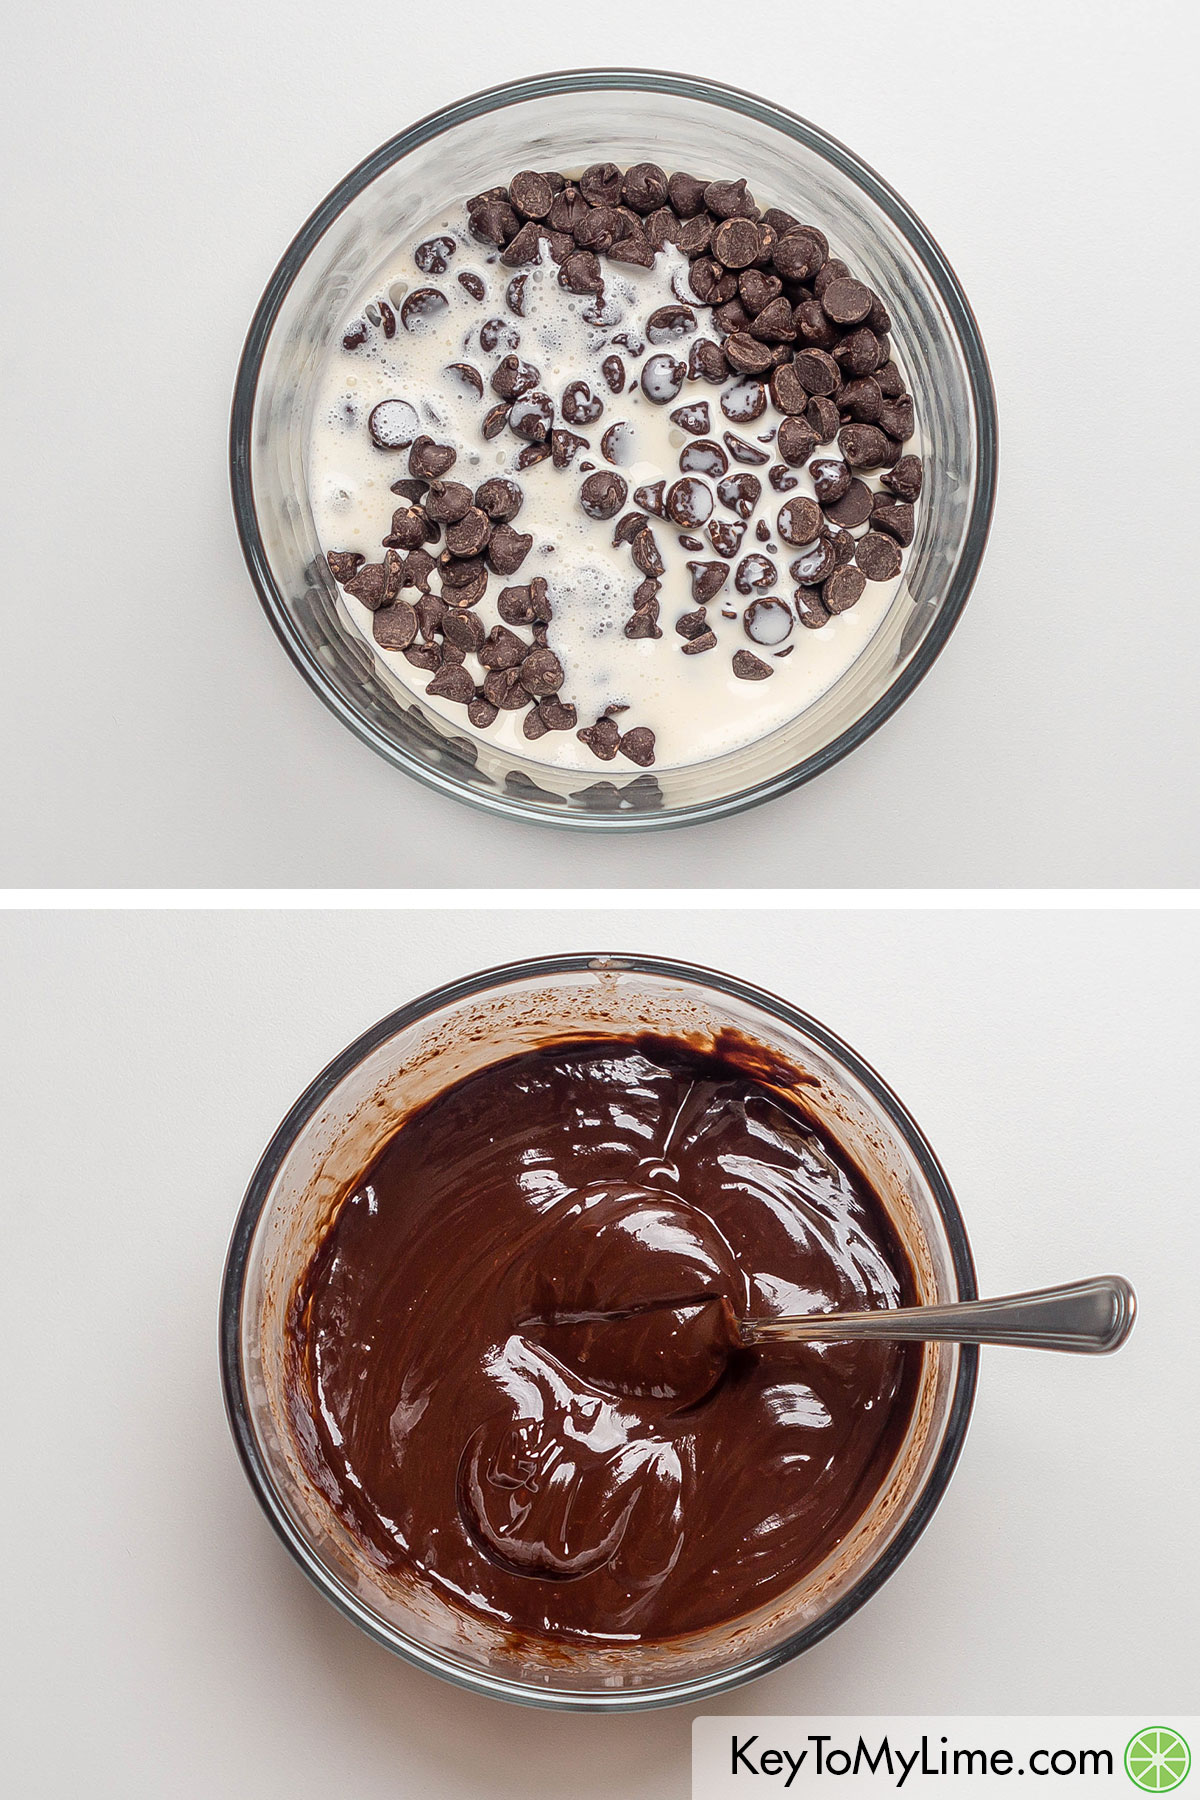 Melting the chocolate and cream together in a small mixing bowl to form the chocolate topping.